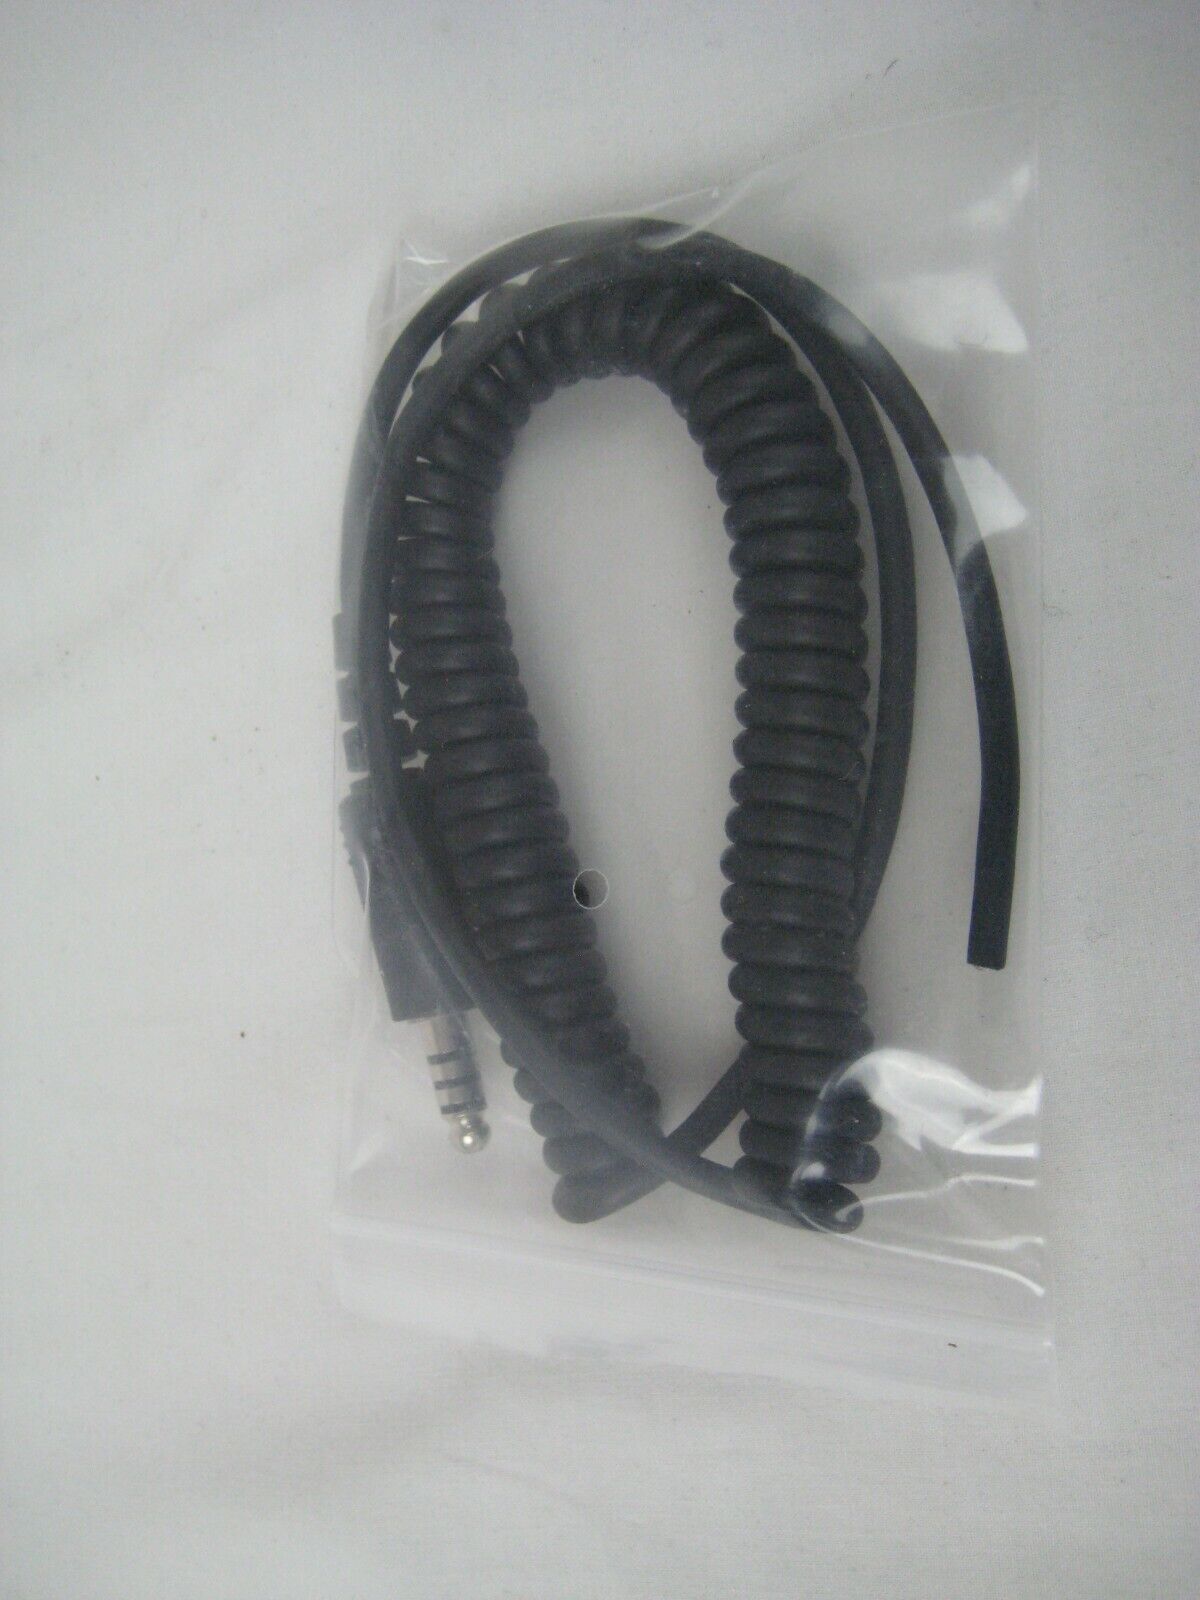 GA/Military Helicopter Replacement Coiled Com Cable U174 plug 4 conductor